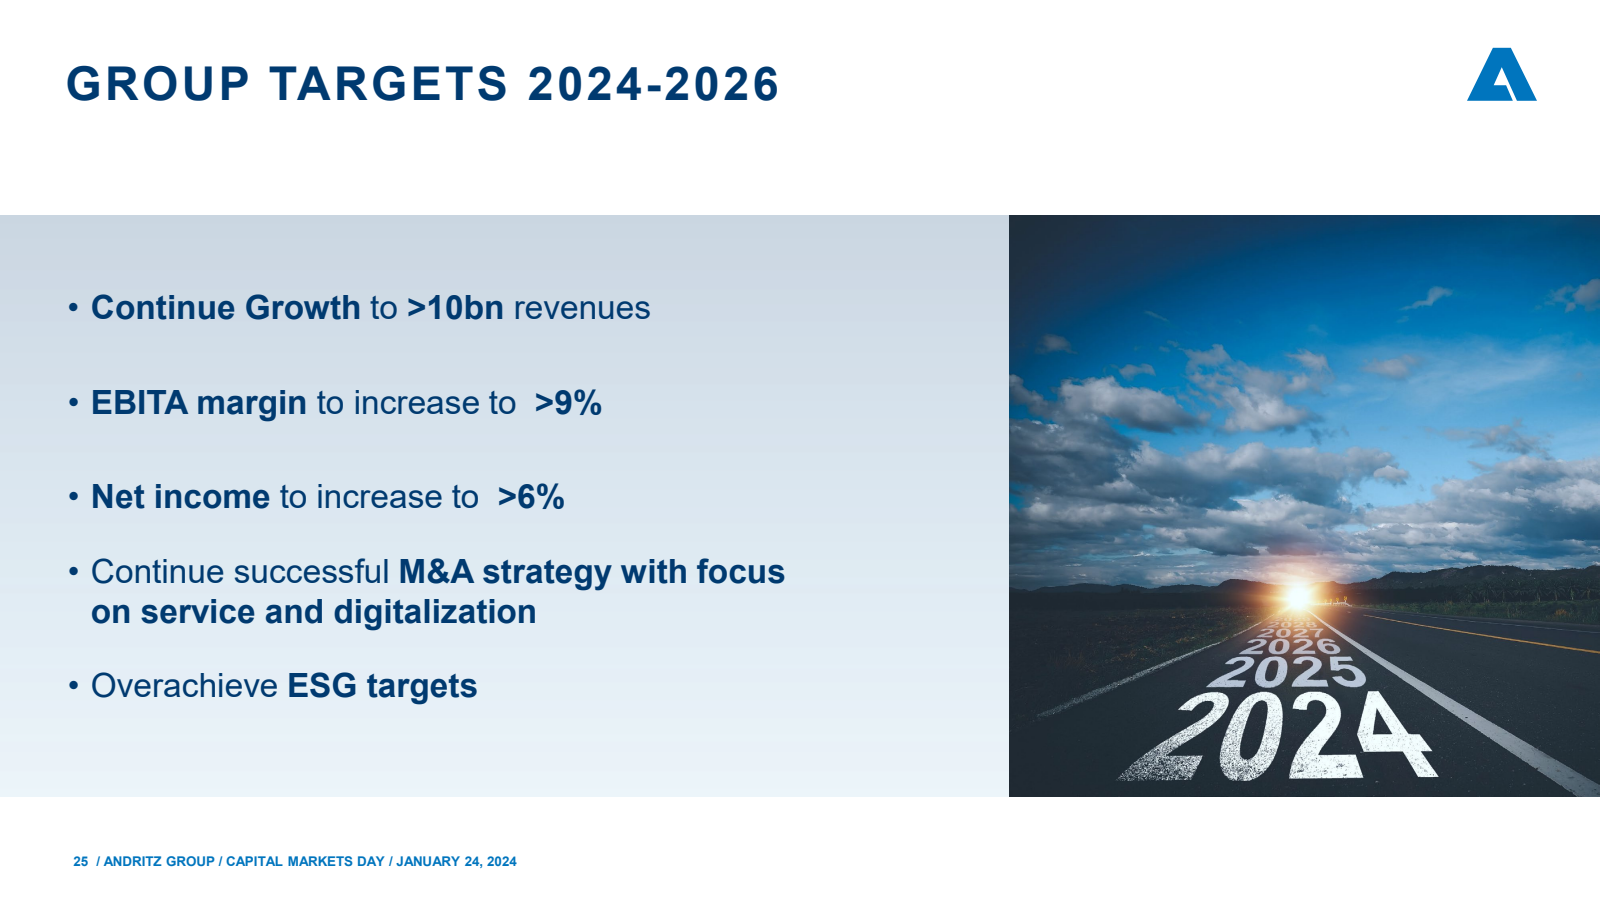 GROUP TARGETS 2024-2